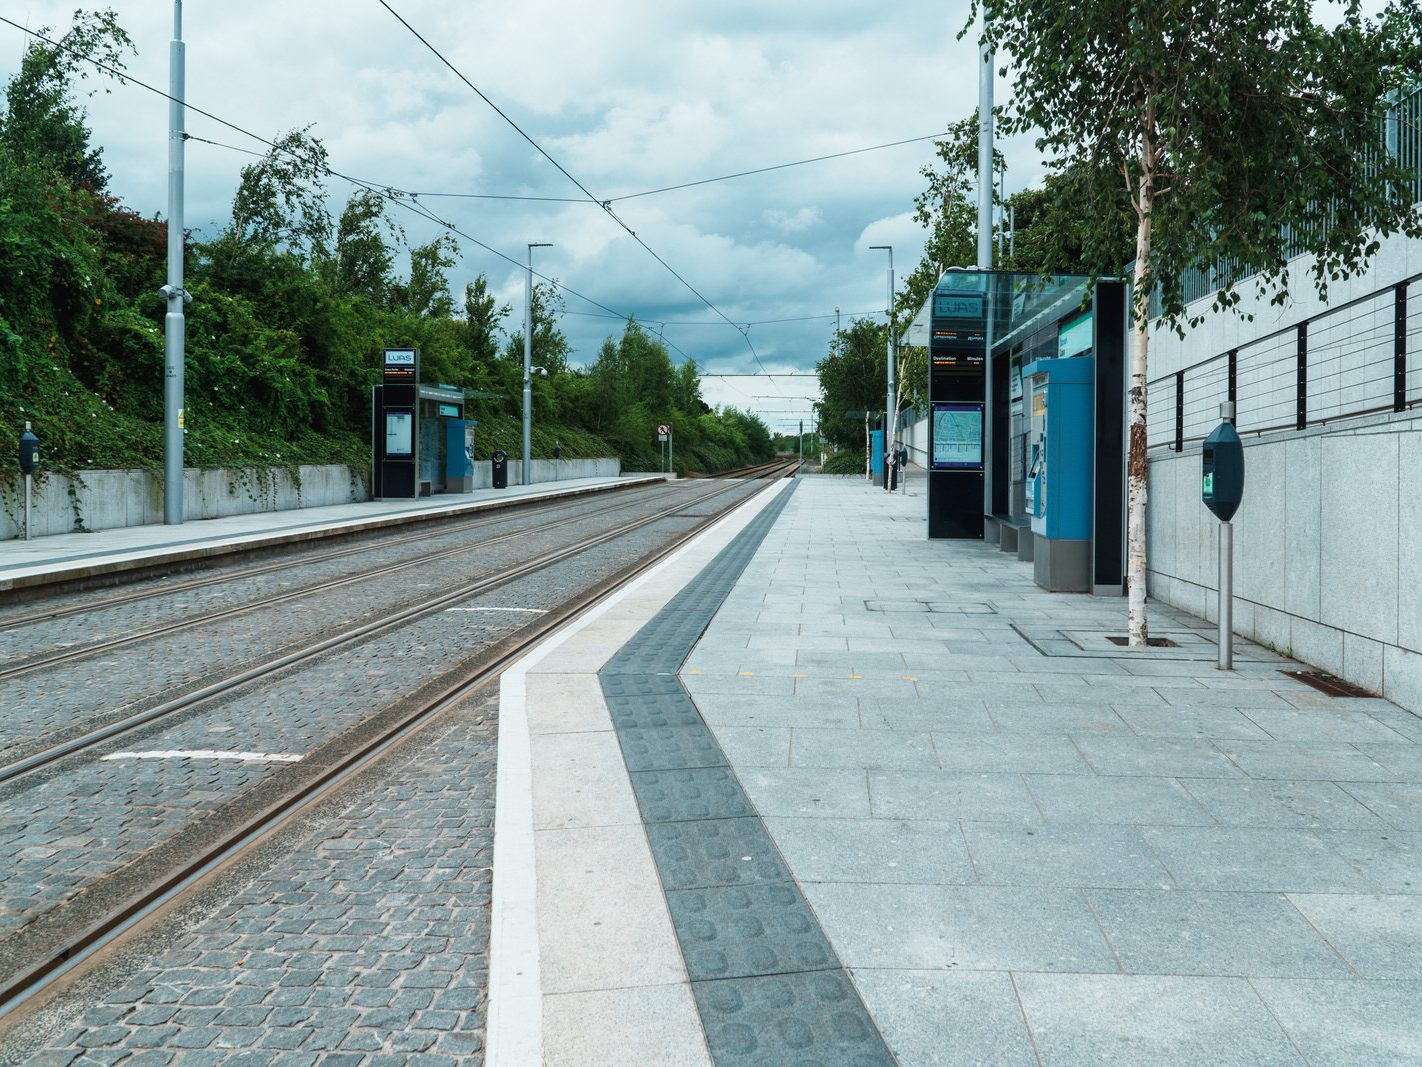 CABRA LUAS TRAM STOP ON CONNAUGHT STREET [GOOGLE BARD INCORRECTLY CLAIMED THAT THERE IS A PUBLIC TOILET AND A TICKET OFFICE] 012